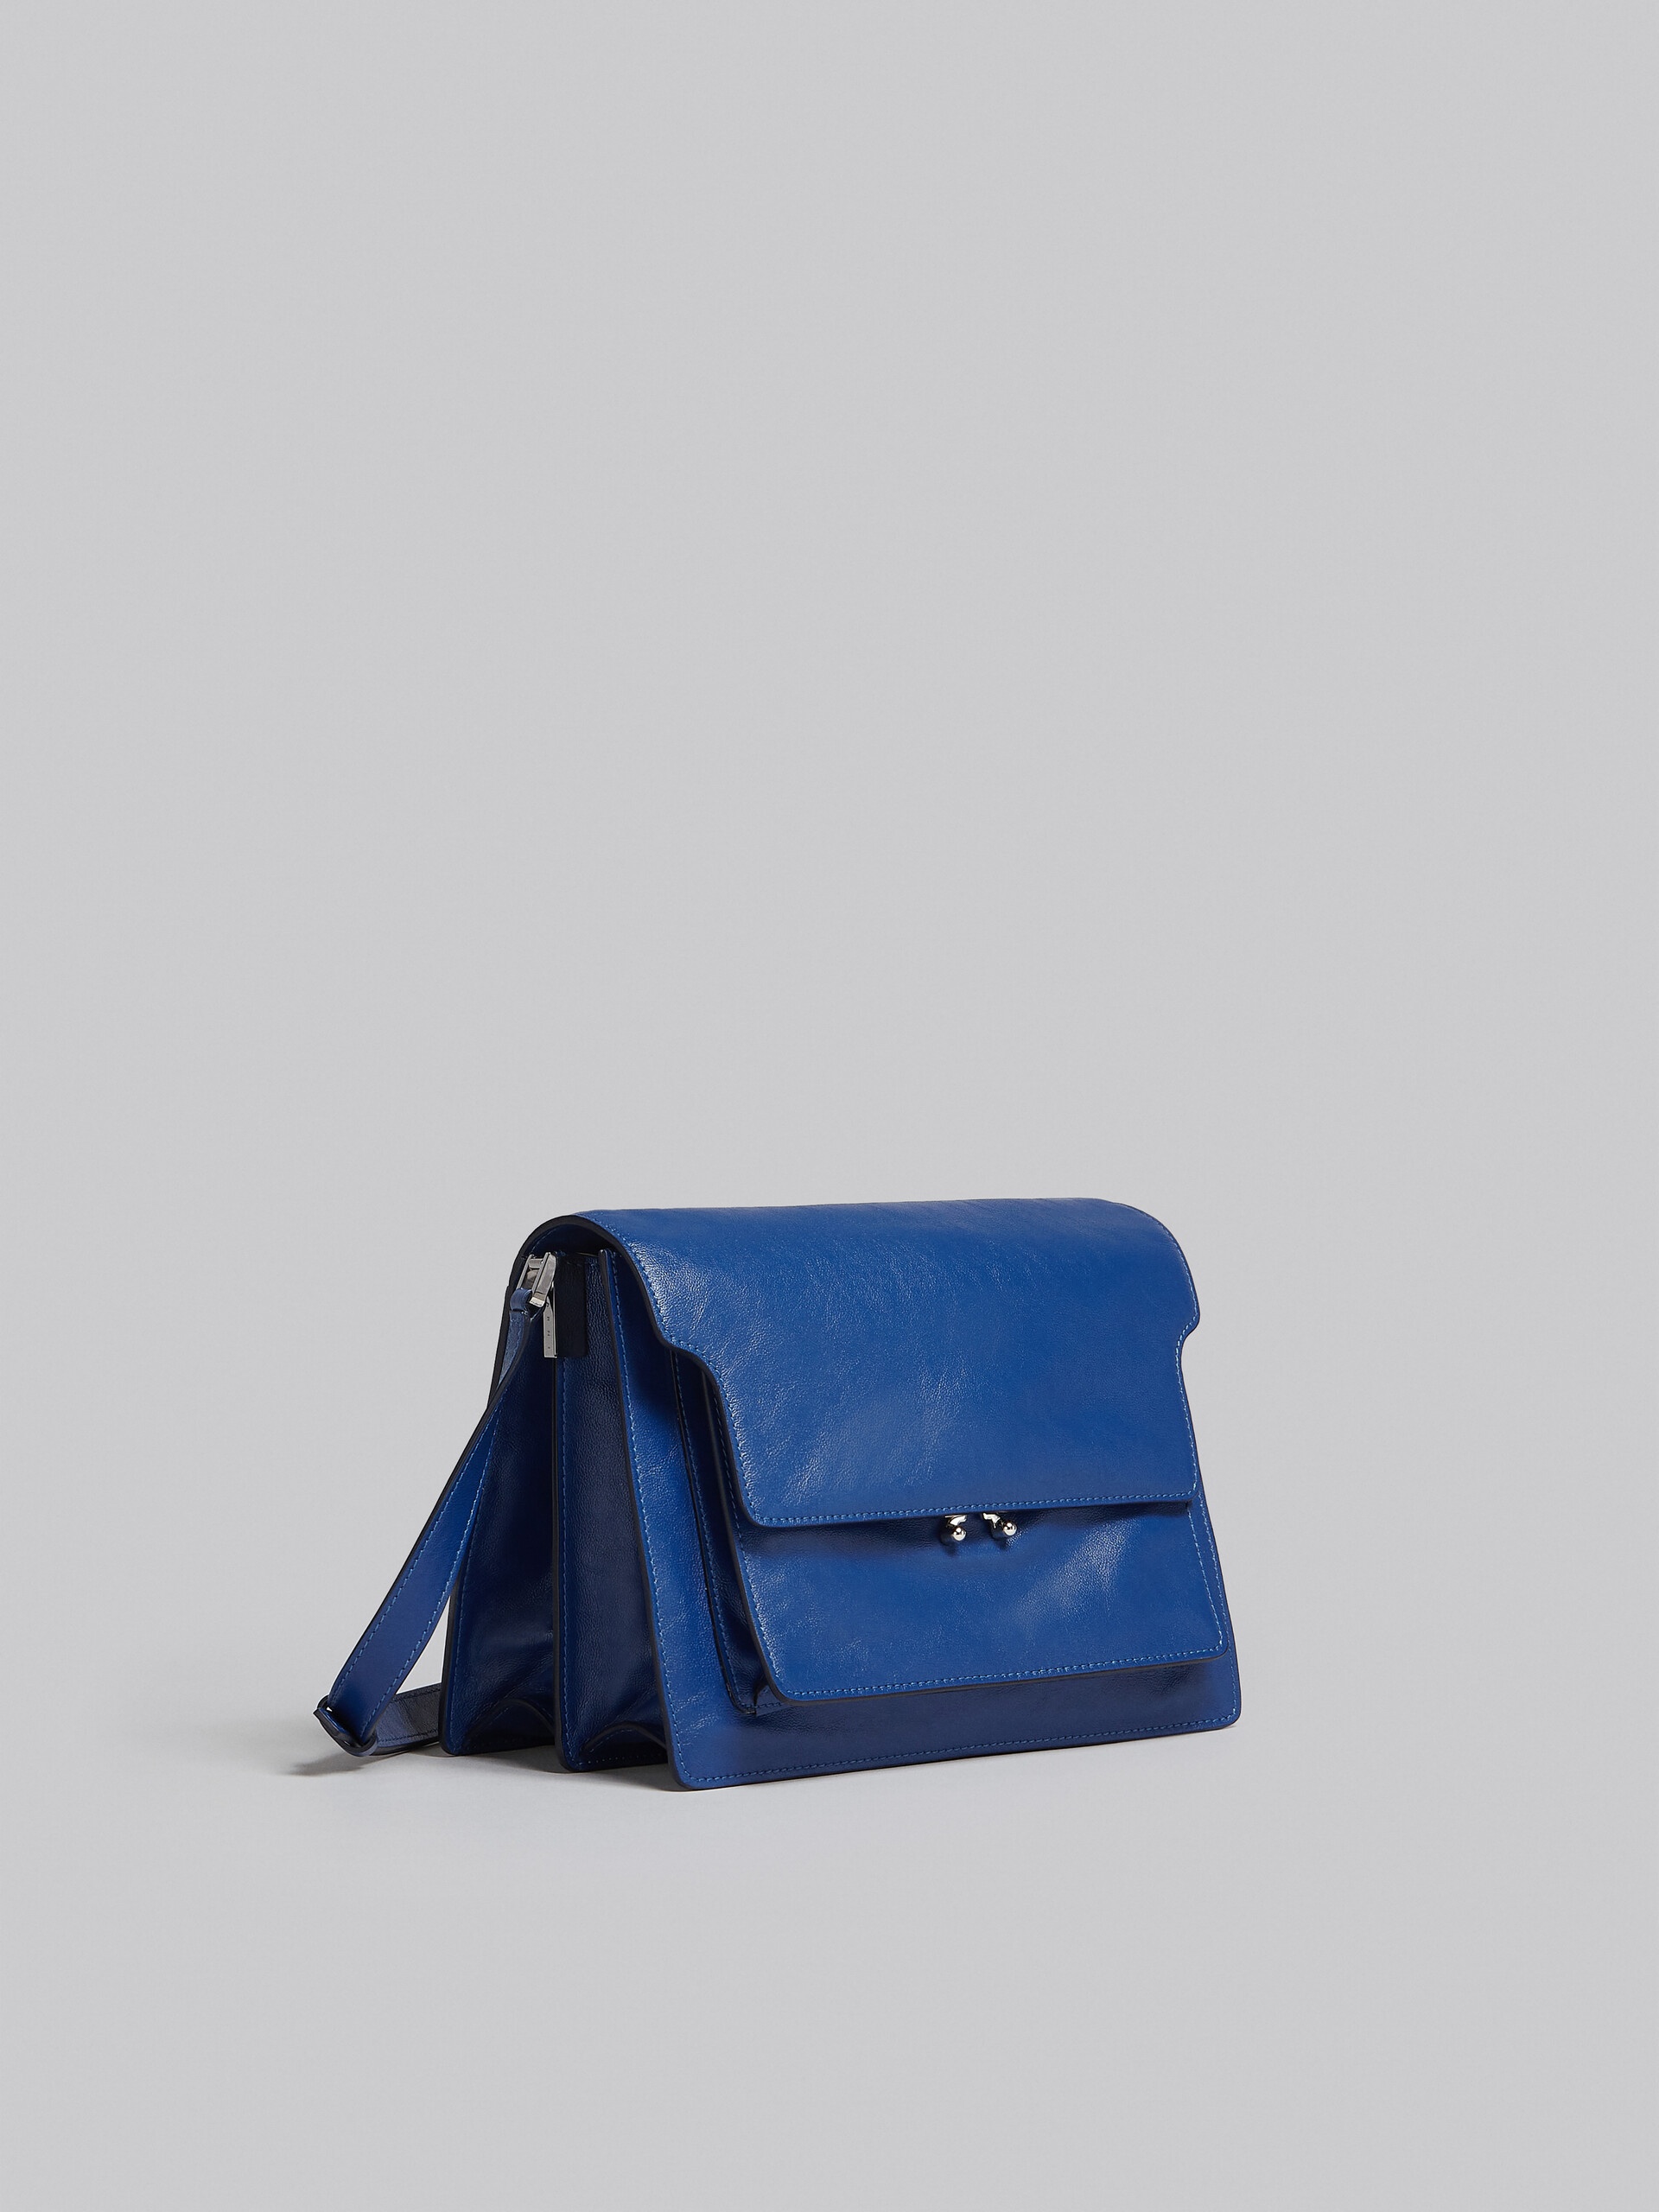 TRUNK SOFT LARGE BAG IN BLUE LEATHER - 6